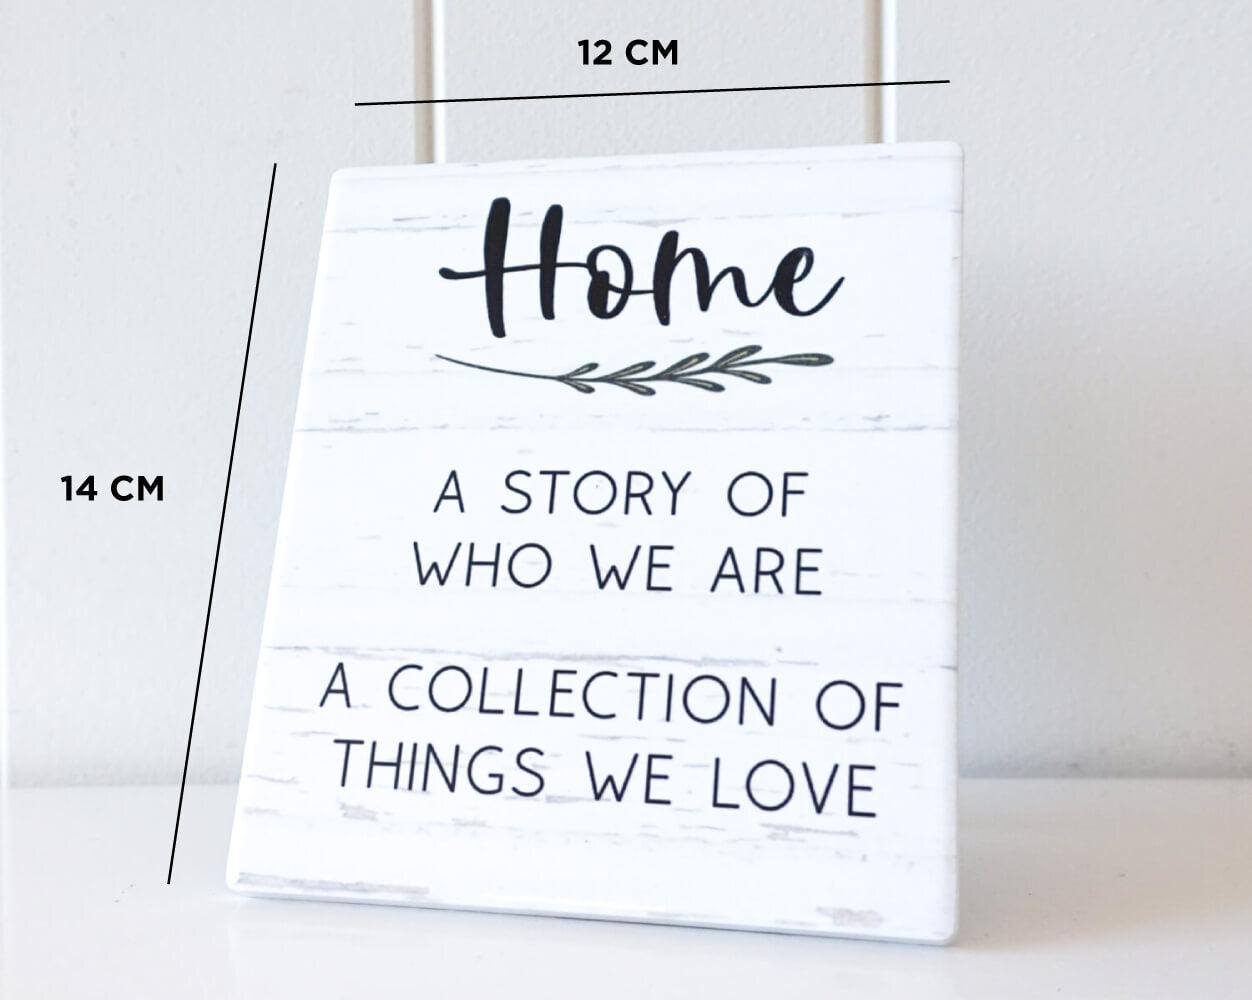 Making the perfect gift, our standing plaques have quirky quotes, or loving sentiments - Ceramic standing plaque - Cute quote - Wide range across the collection - Perfect for up sells/gift items Purchase in multiples of 2 - Plaque Measures 12cm x 14cm